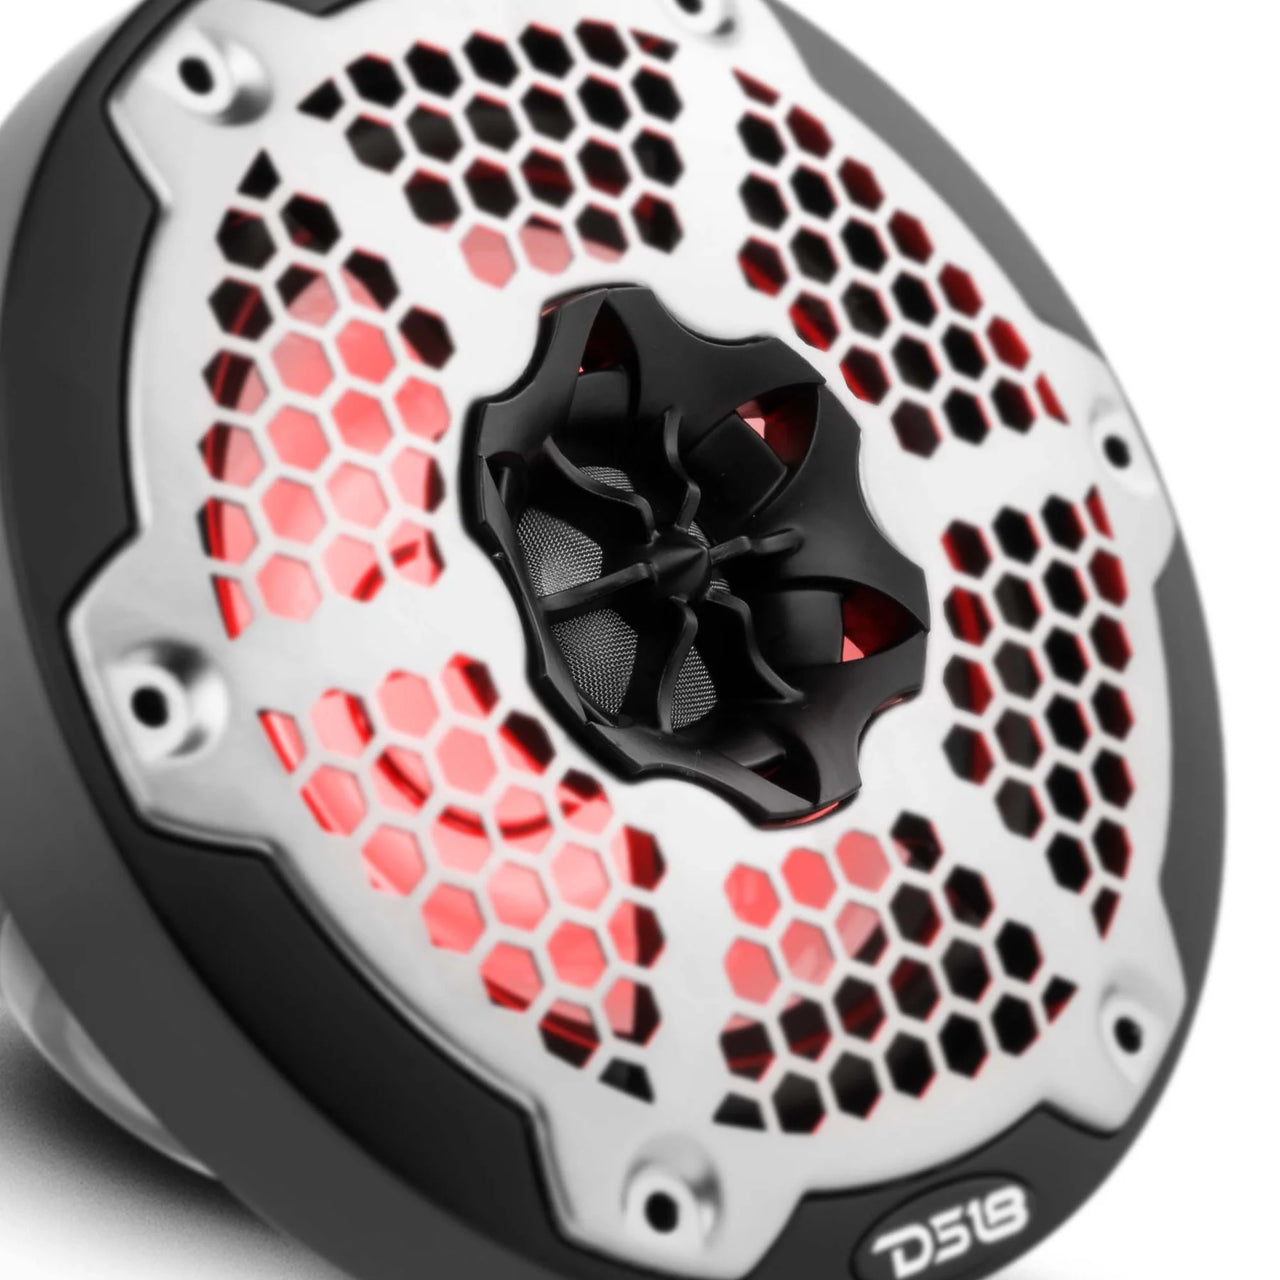 DS18 New Edition 6.5" 2-Way Marine Speakers With RGB LED Lights